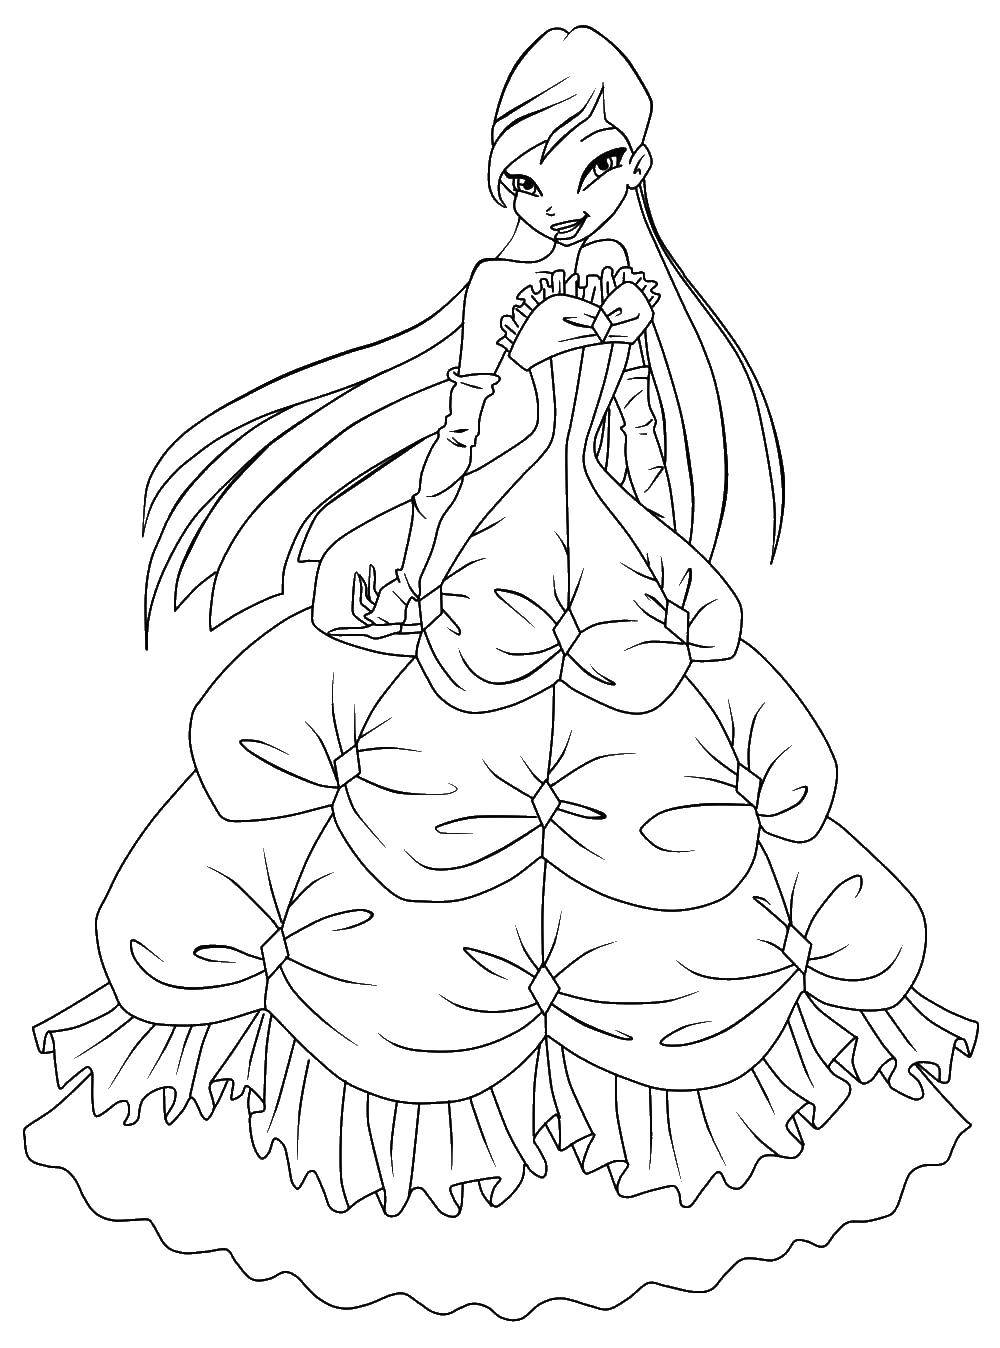 Coloring Muse in a ball gown. Category Winx. Tags:  Character cartoon, Winx.